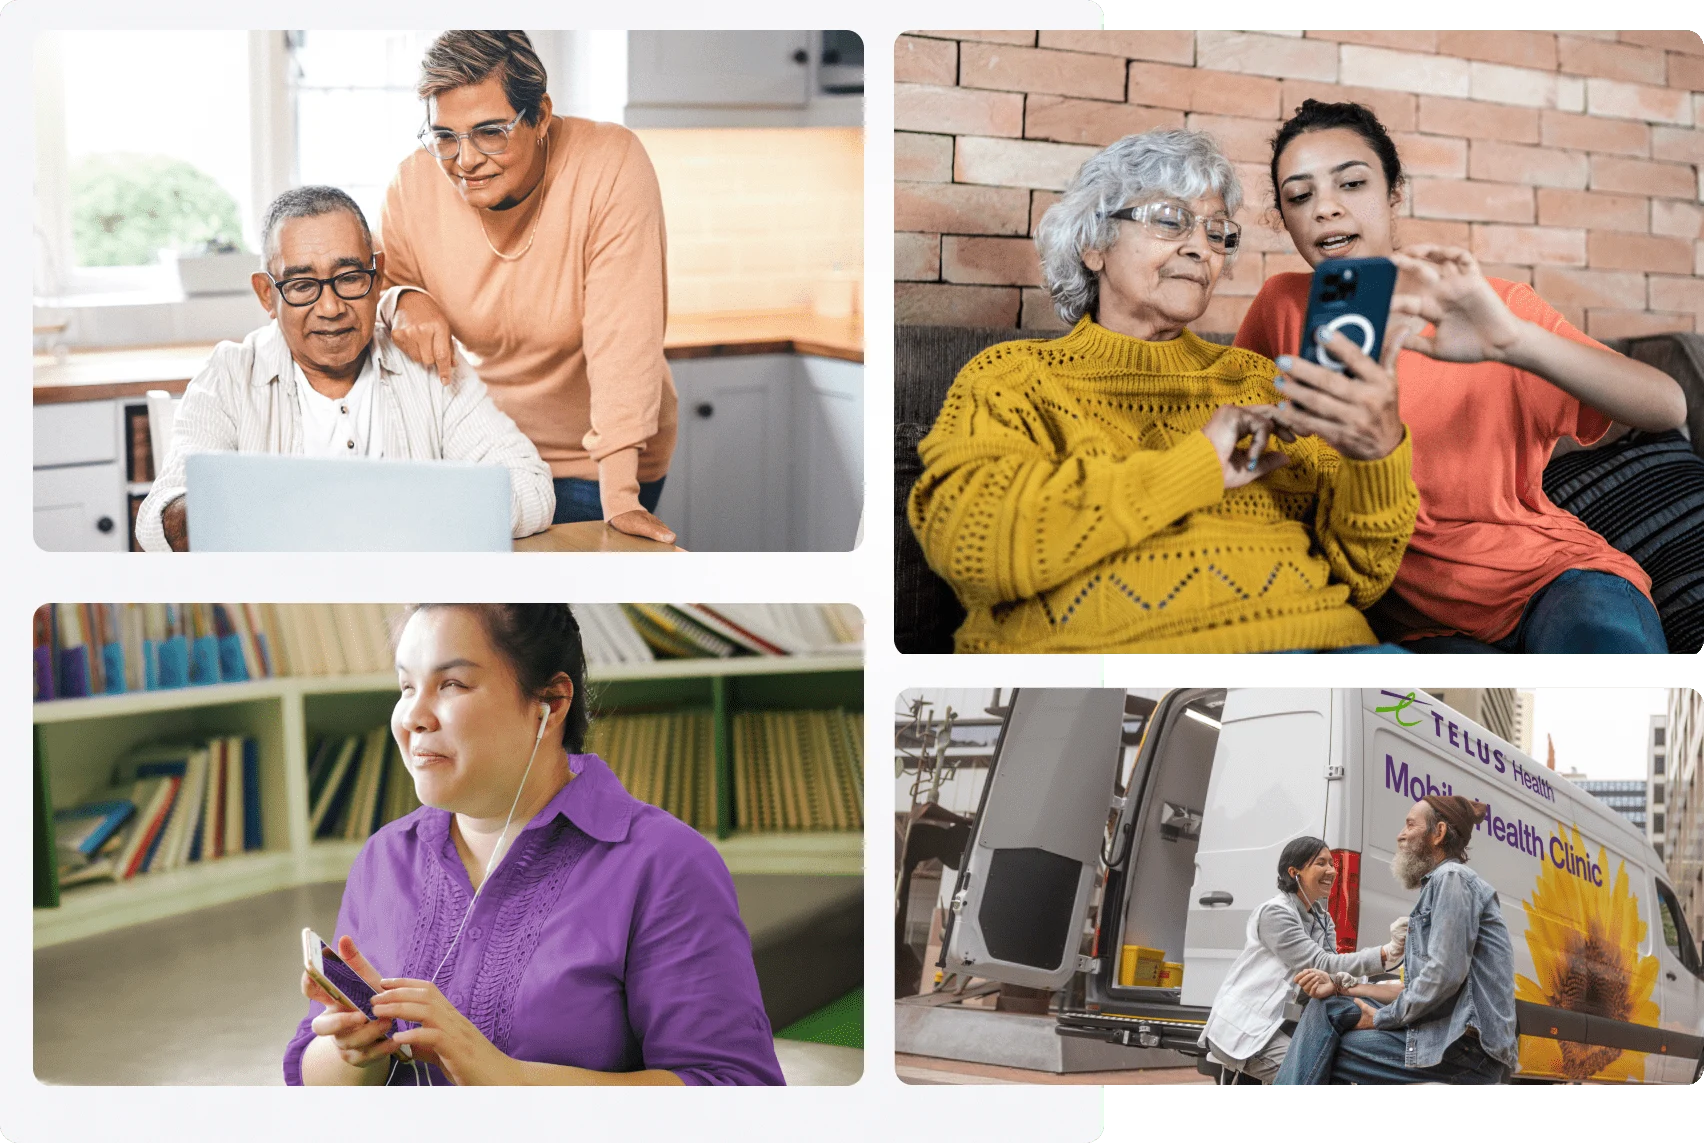 An image collage: A senior couple viewing a laptop at their kitchen table; two women viewing a smartphone; a person with headphones and smartphone; a TELUS Mobile Health Clinic member with a patient.